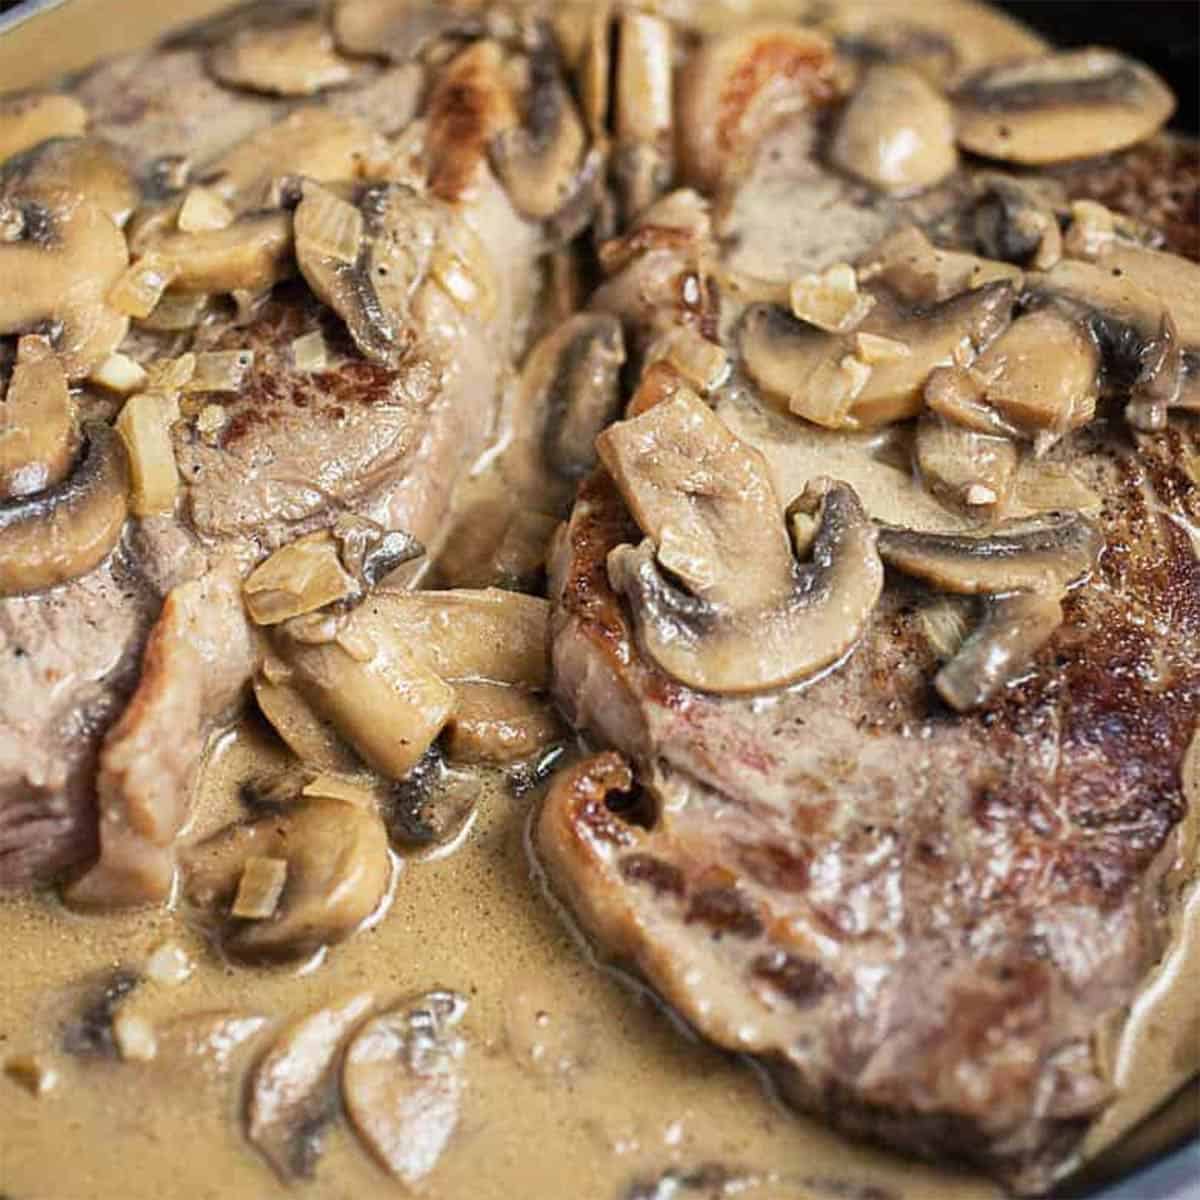 Diane sauce over steak in a skillet with mushrooms